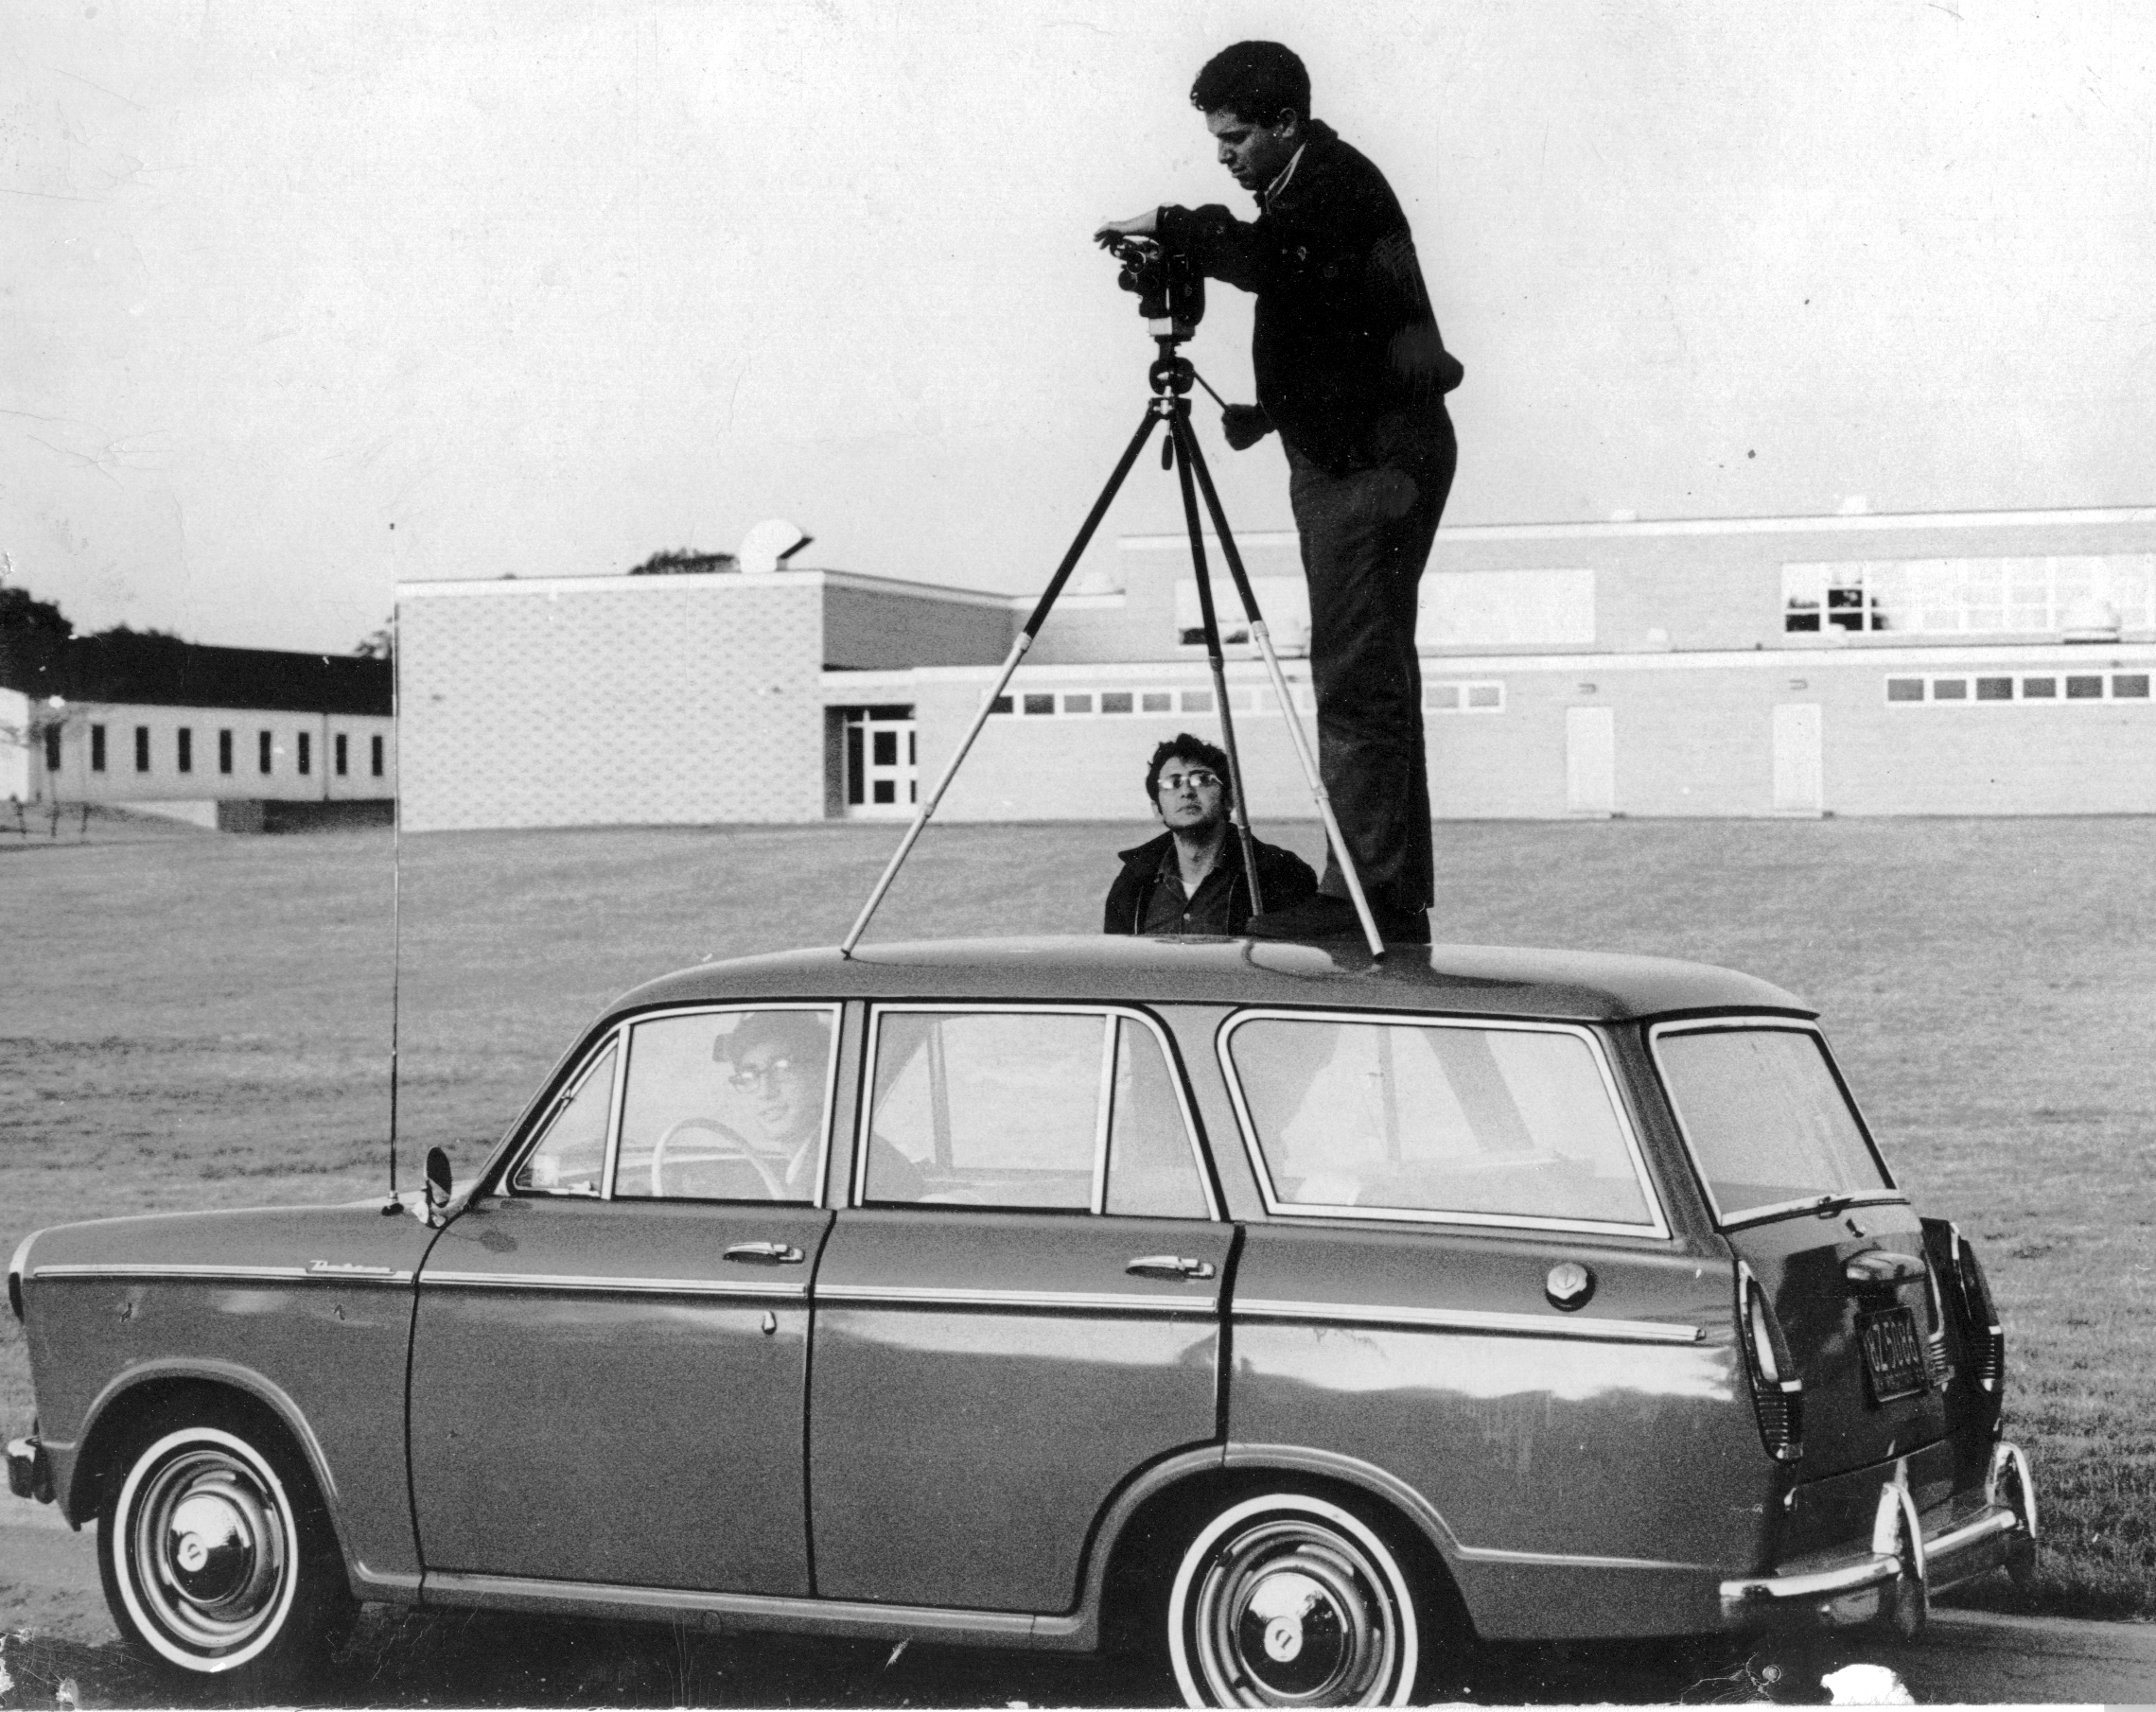 Shooting his 1st film with a 16mm windup Bolex